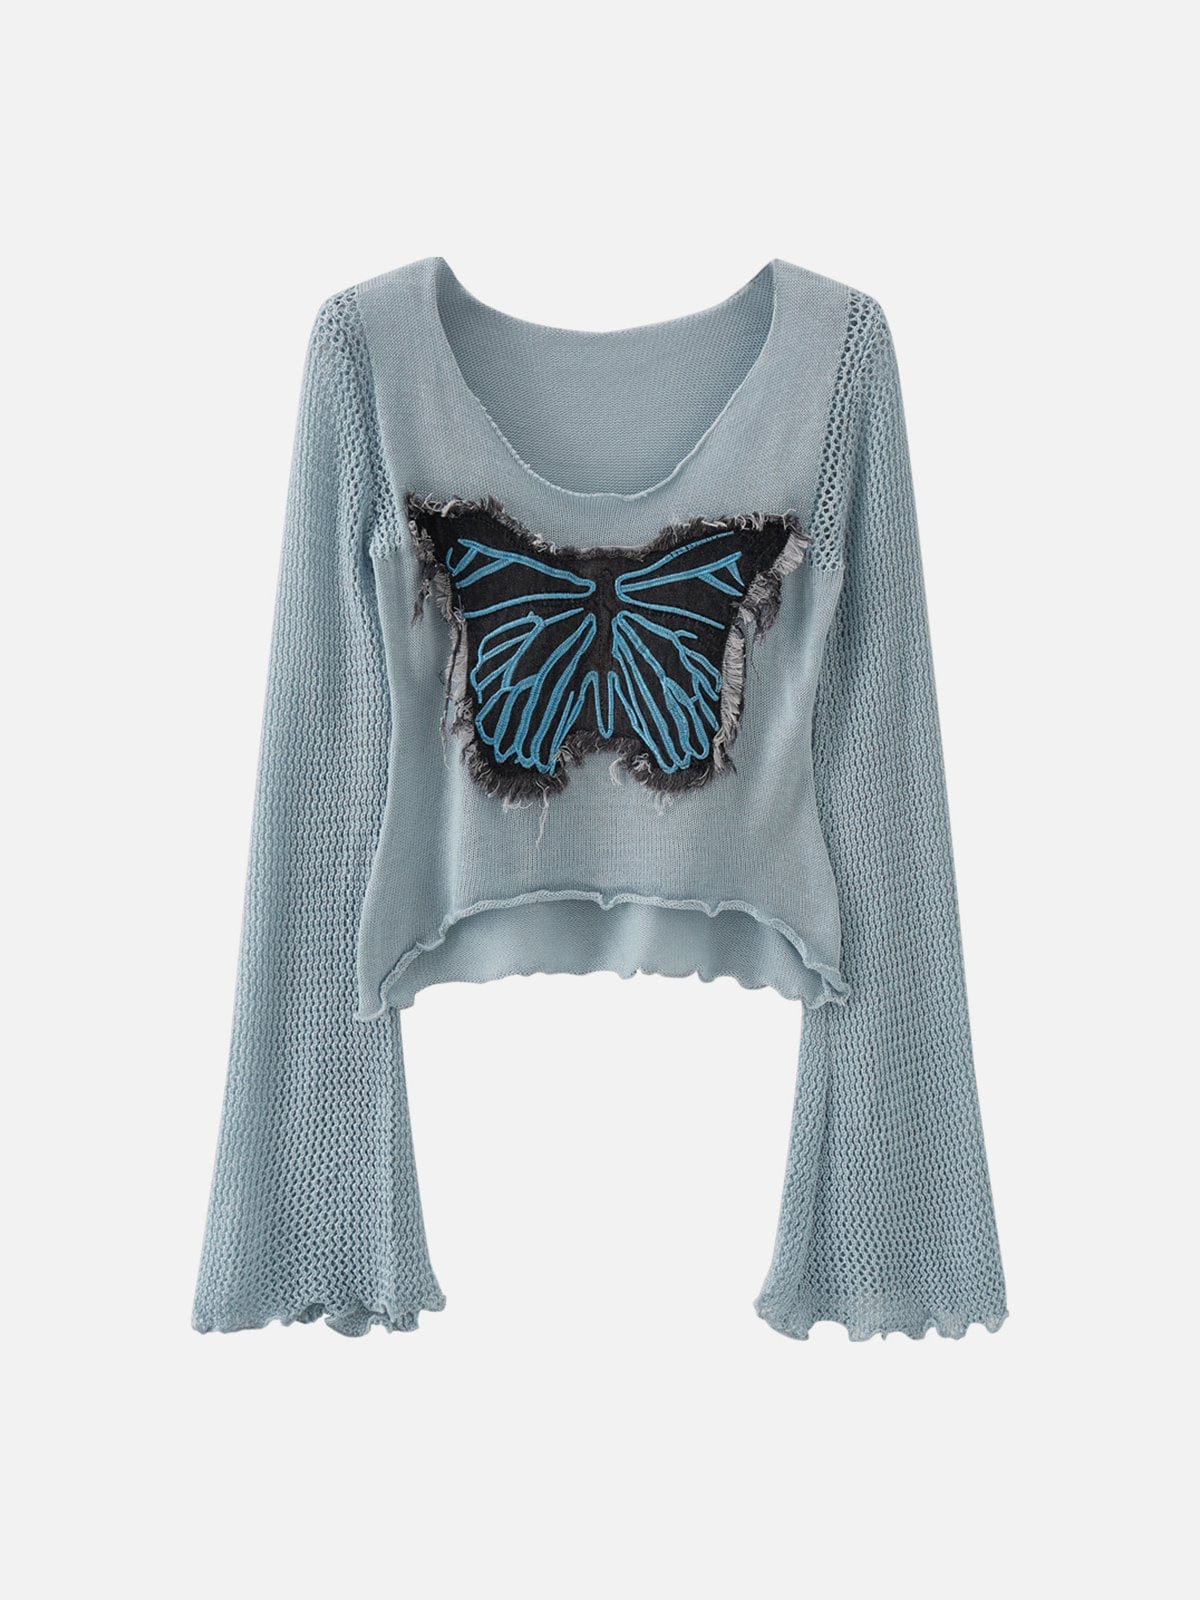 NEV Butterfly Applique Flared Sleeve Crop Top